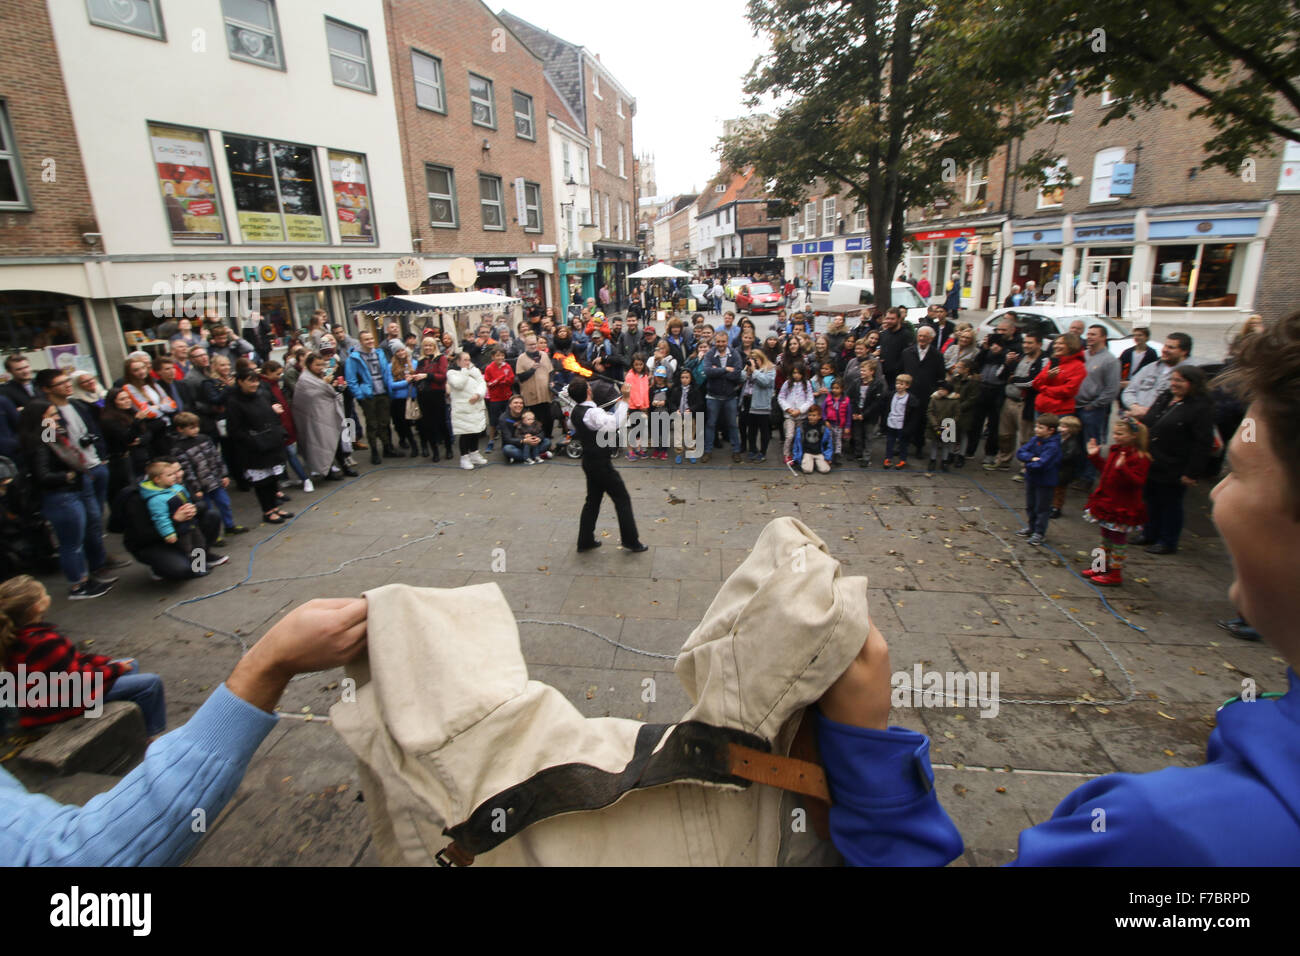 Street performer breathing fire with assistants holding a straight jacket, in York 2015 Stock Photo